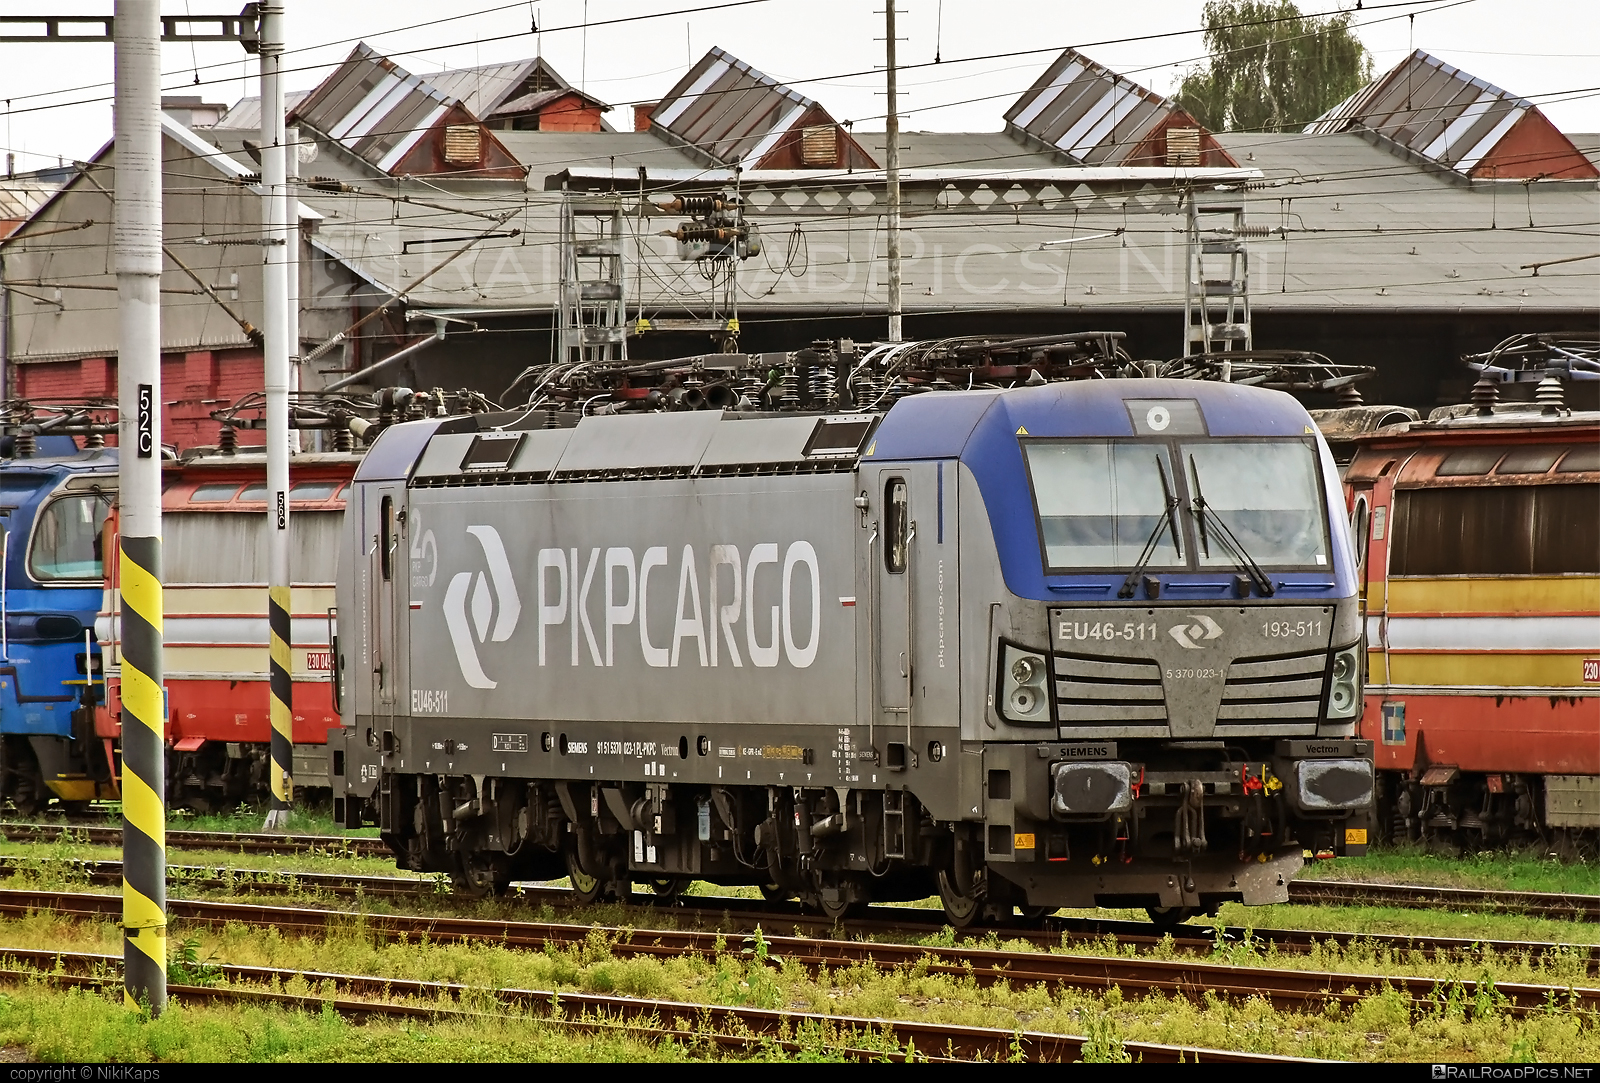 Siemens Vectron MS - 5 370 023-1 operated by PKP CARGO Spólka Akcyjna #pkp #pkpcargo #pkpcargospolkaakcyjna #siemens #siemensVectron #siemensVectronMS #vectron #vectronMS